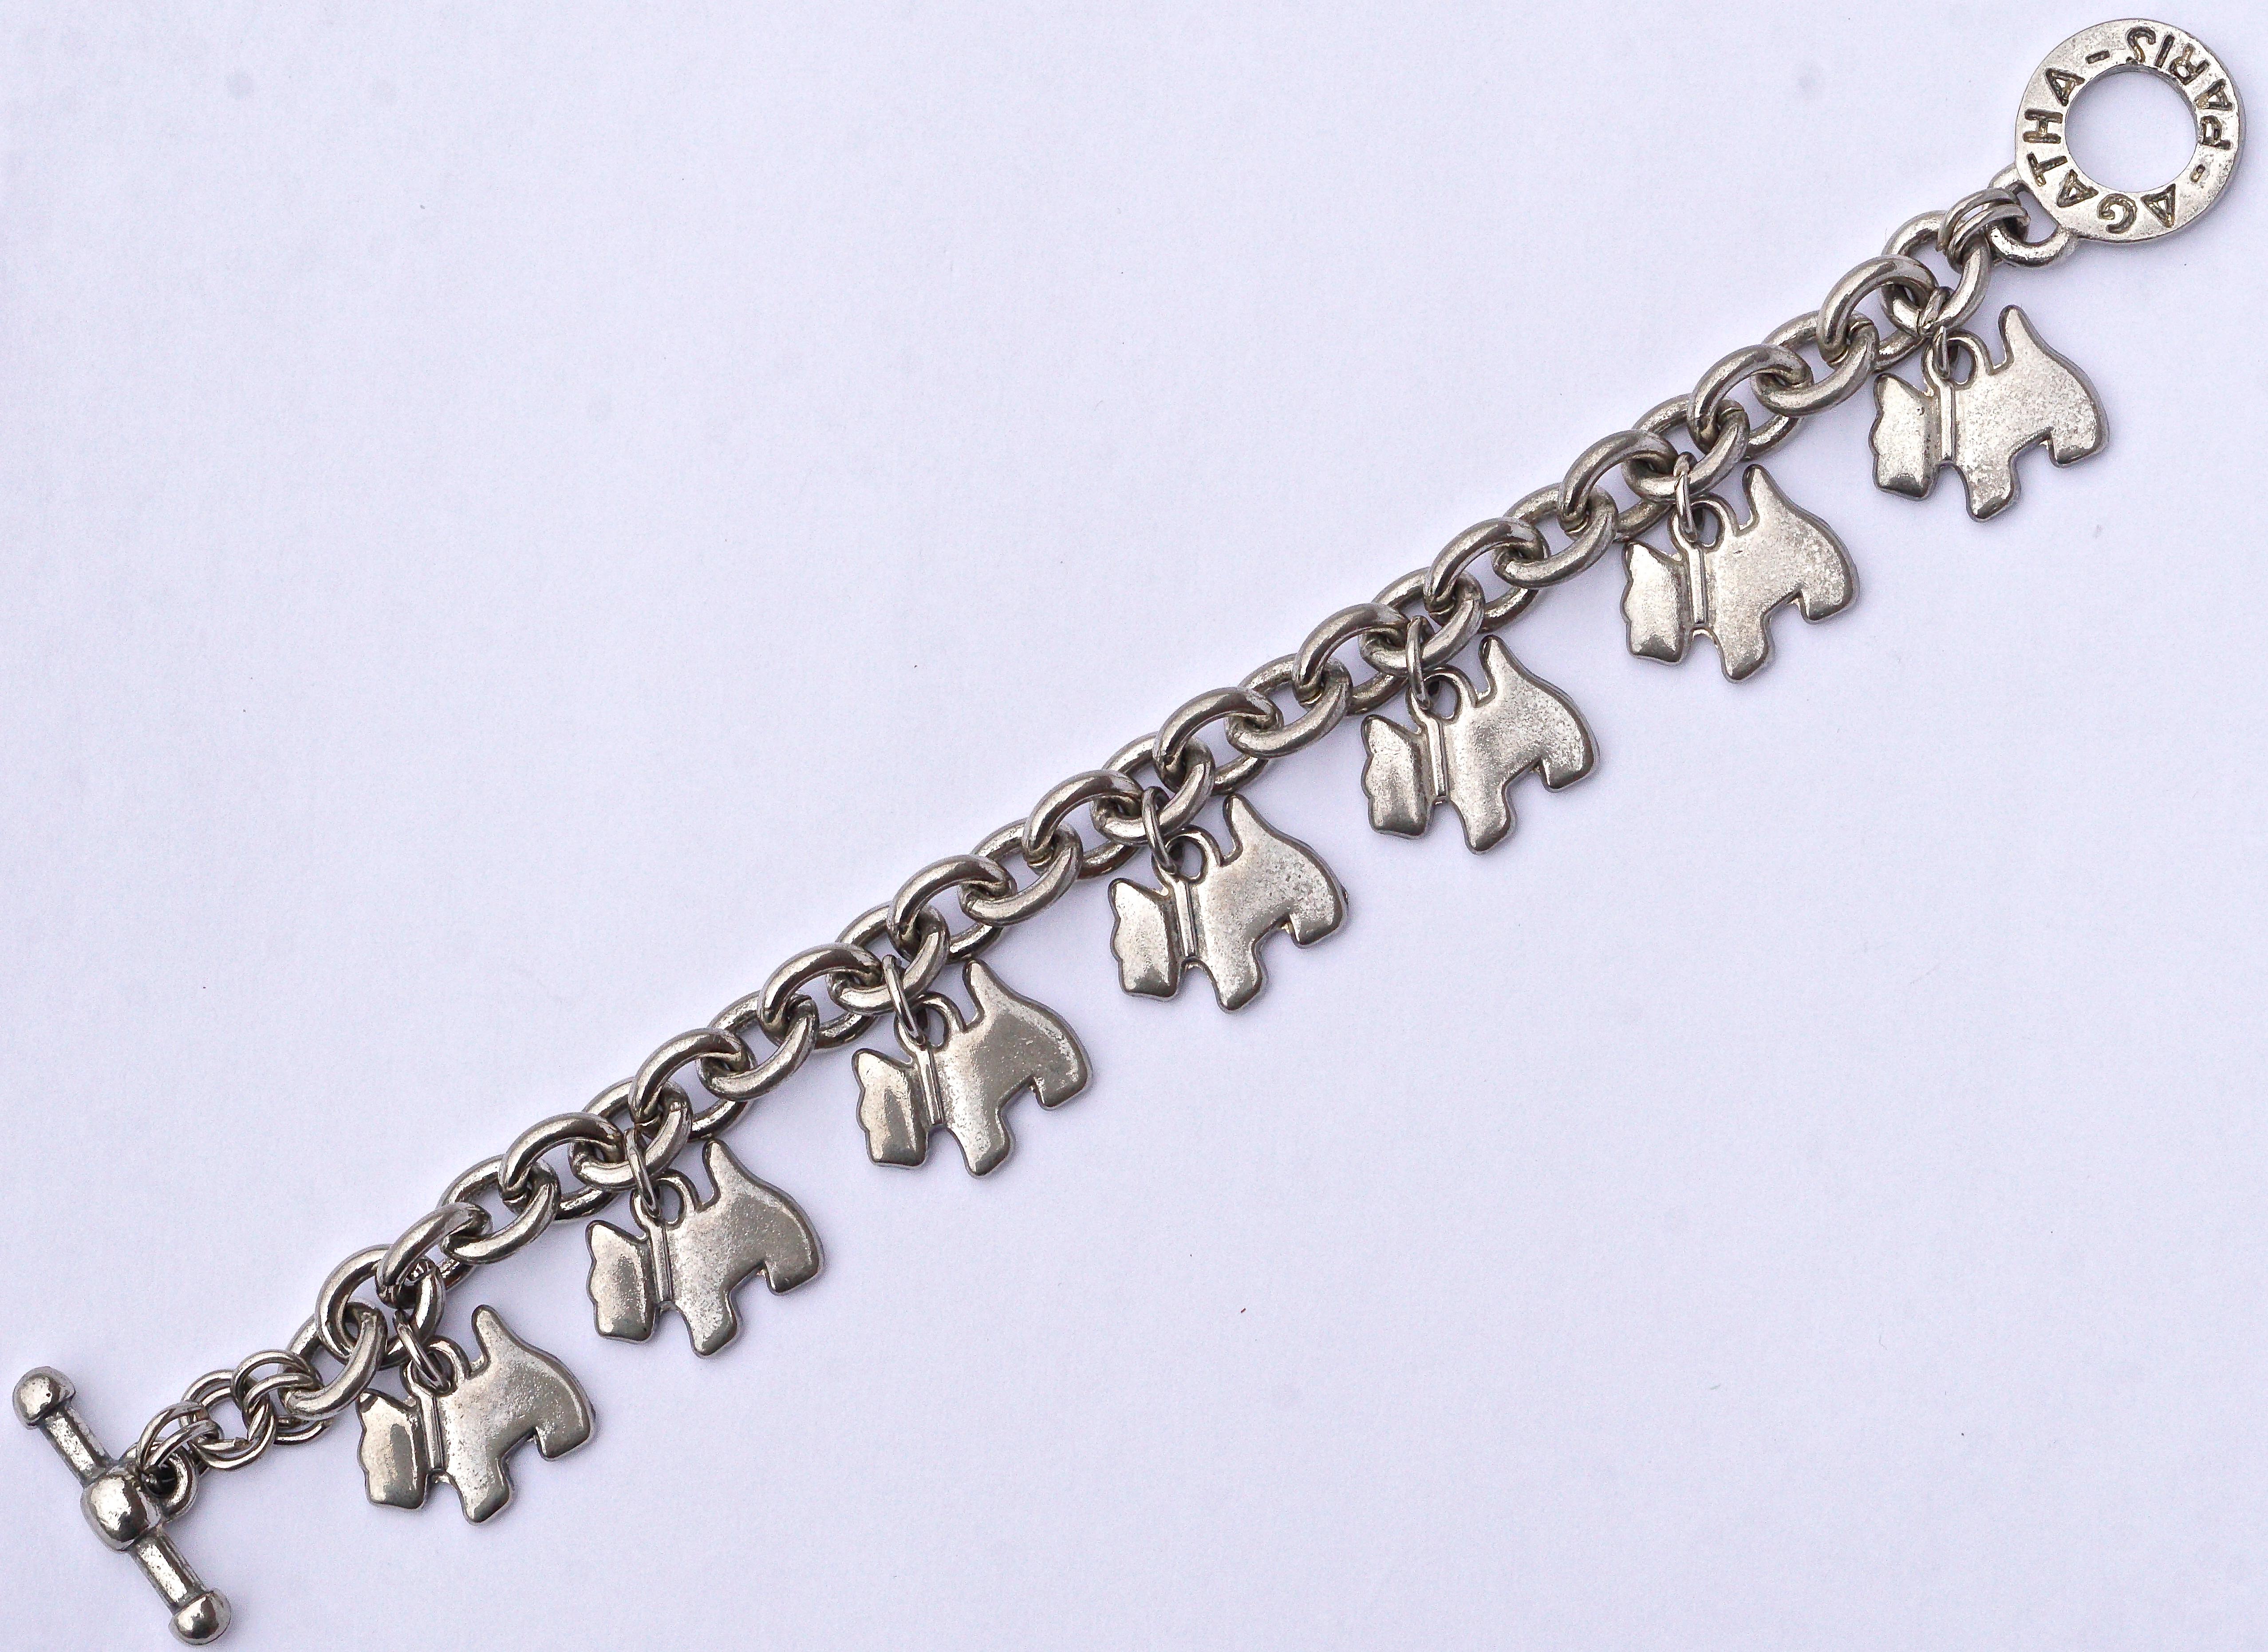 Agatha Paris silver tone bracelet with a toggle clasp, featuring the Agatha scottie dog emblem, circa 1980s. The chain bracelet is chunky and has seven lovely scottie dog charms in all. Measuring length 20.5cm / 8.07 inches, and the links measure